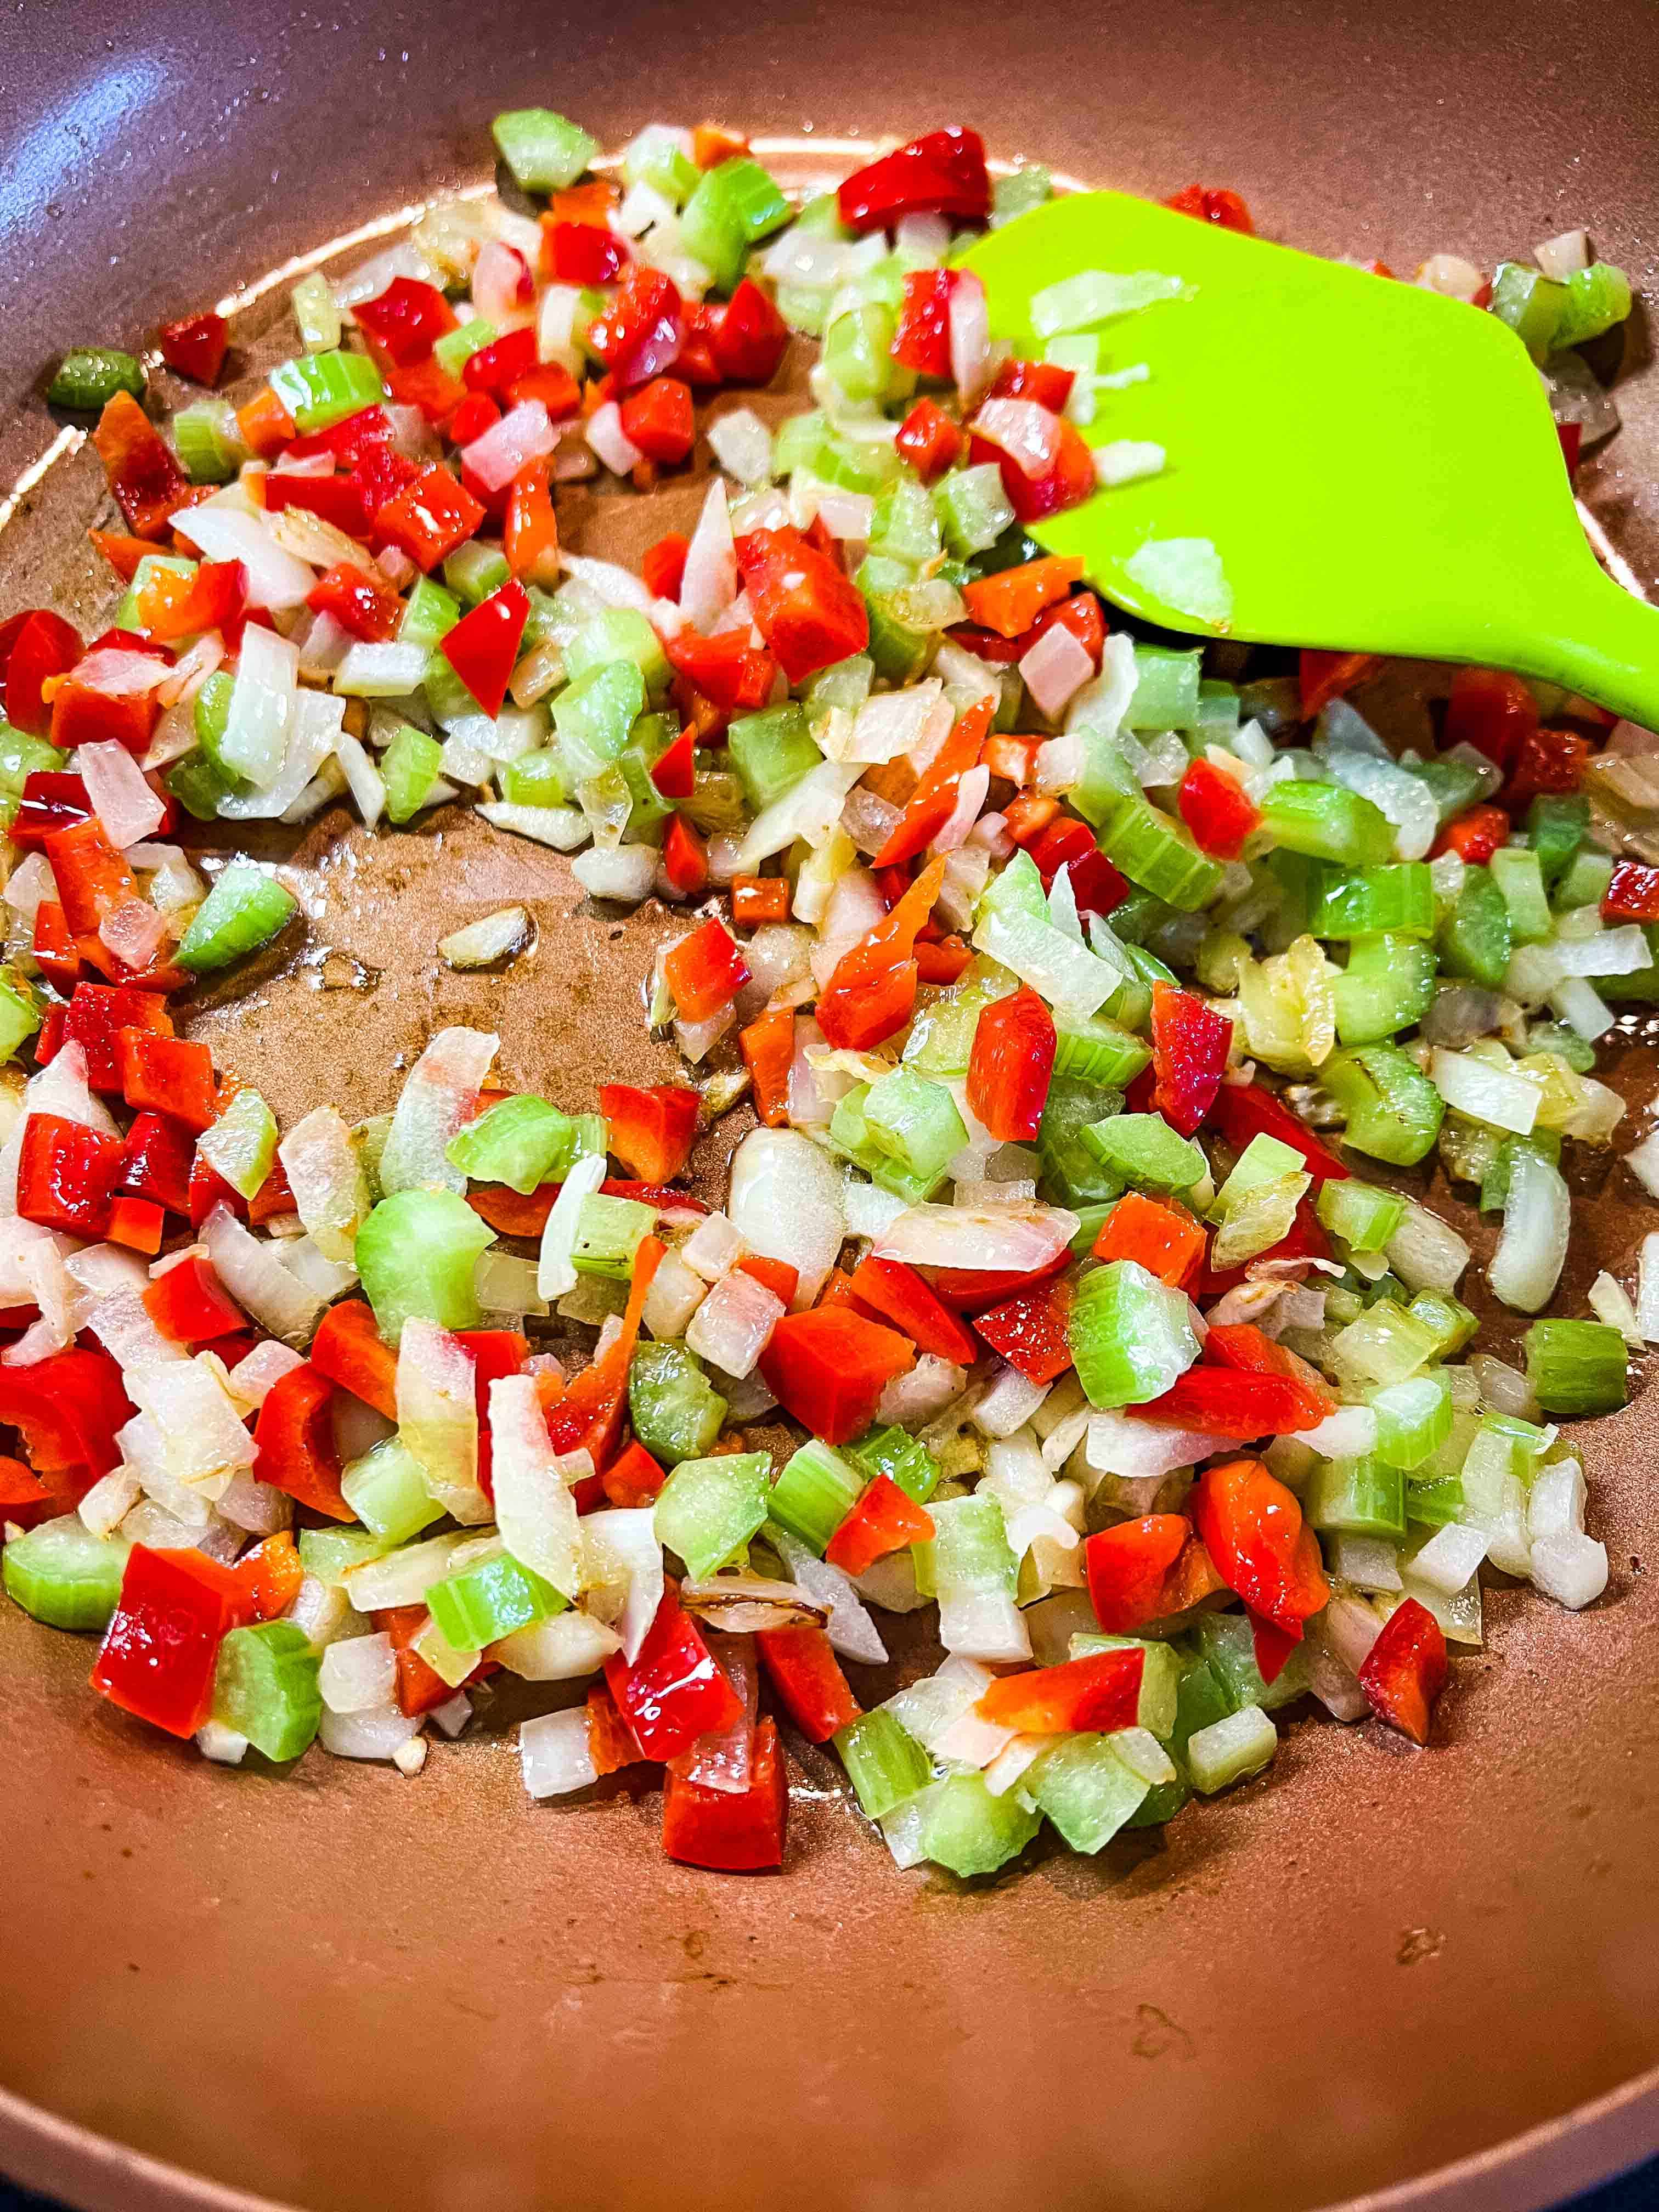 Onion, celery, bell pepper sauteeing in a skillet.